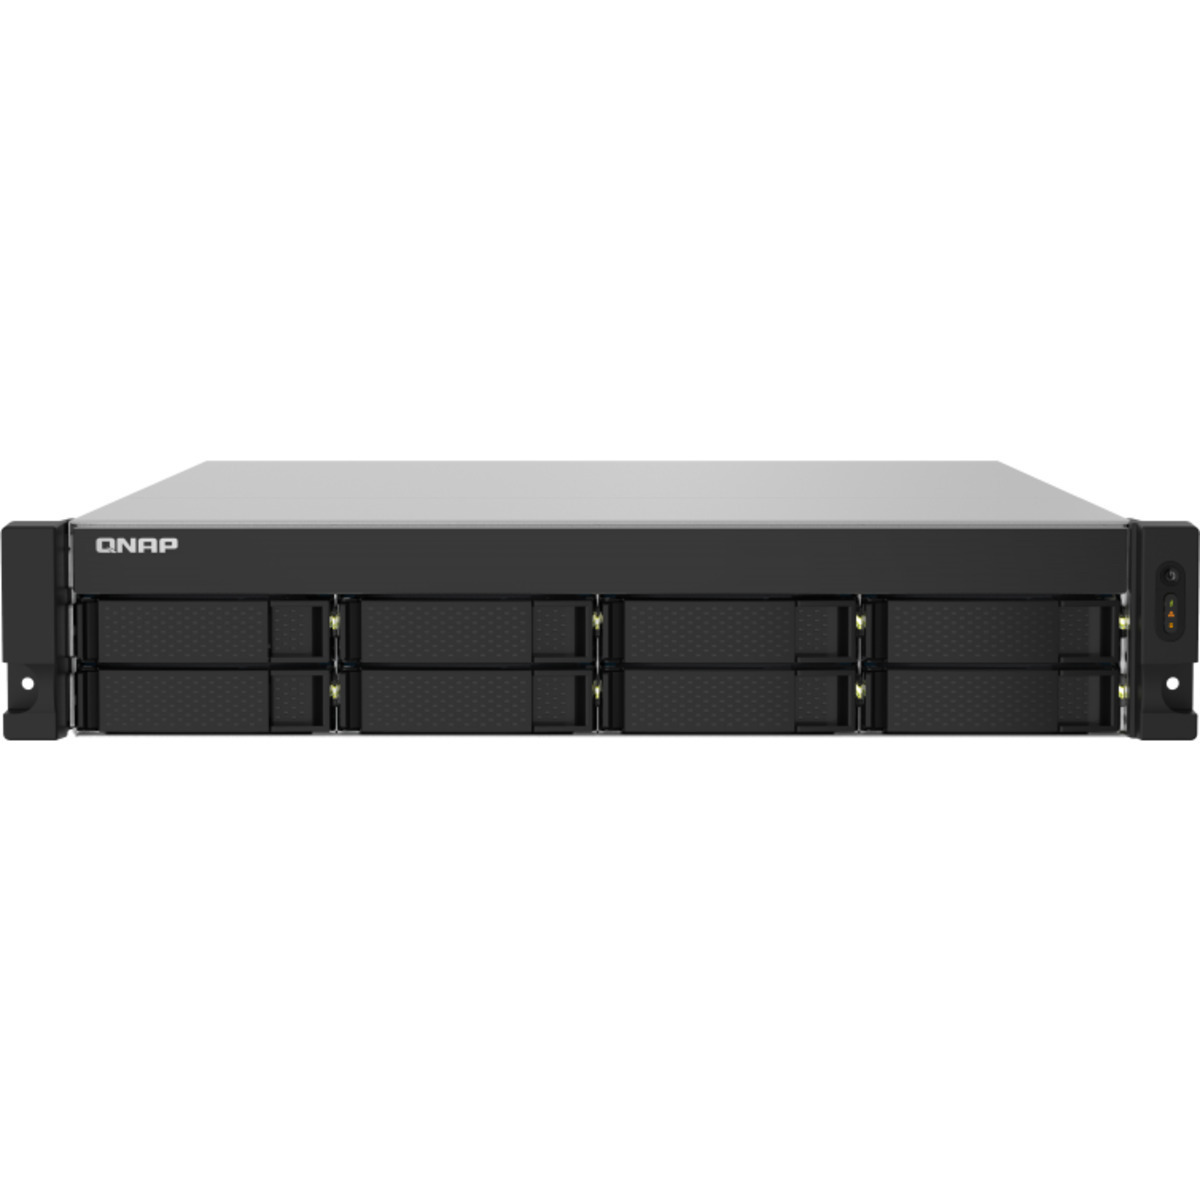 QNAP TS-832PXU 7tb 8-Bay RackMount Personal / Basic Home / Small Office NAS - Network Attached Storage Device 7x1tb Crucial MX500 CT1000MX500SSD1 2.5 560/510MB/s SATA 6Gb/s SSD CONSUMER Class Drives Installed - Burn-In Tested - FREE RAM UPGRADE TS-832PXU